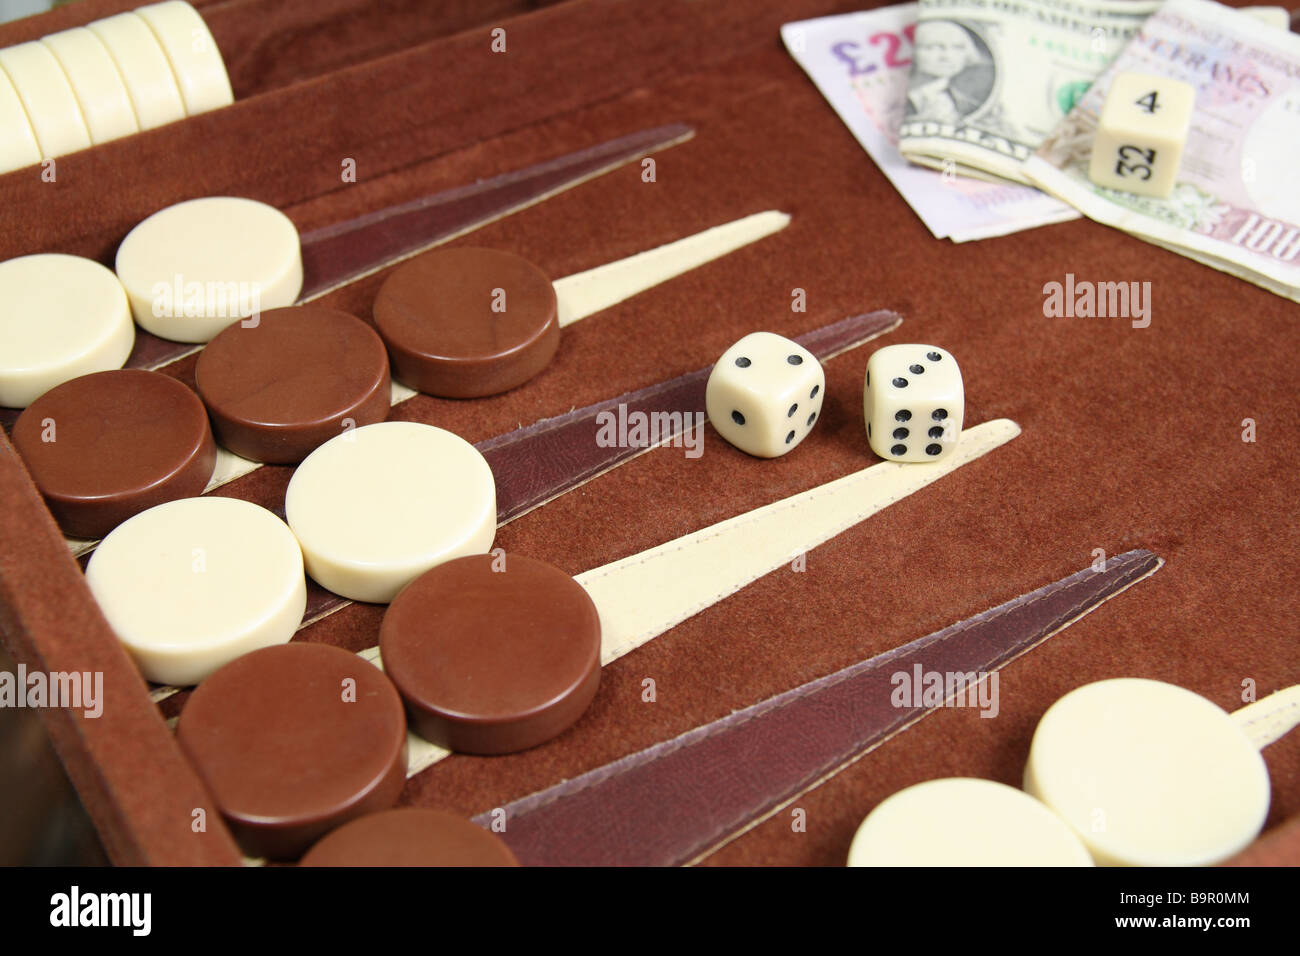 Backgammon game in progress showing checkers, dice and wager. Stock Photo